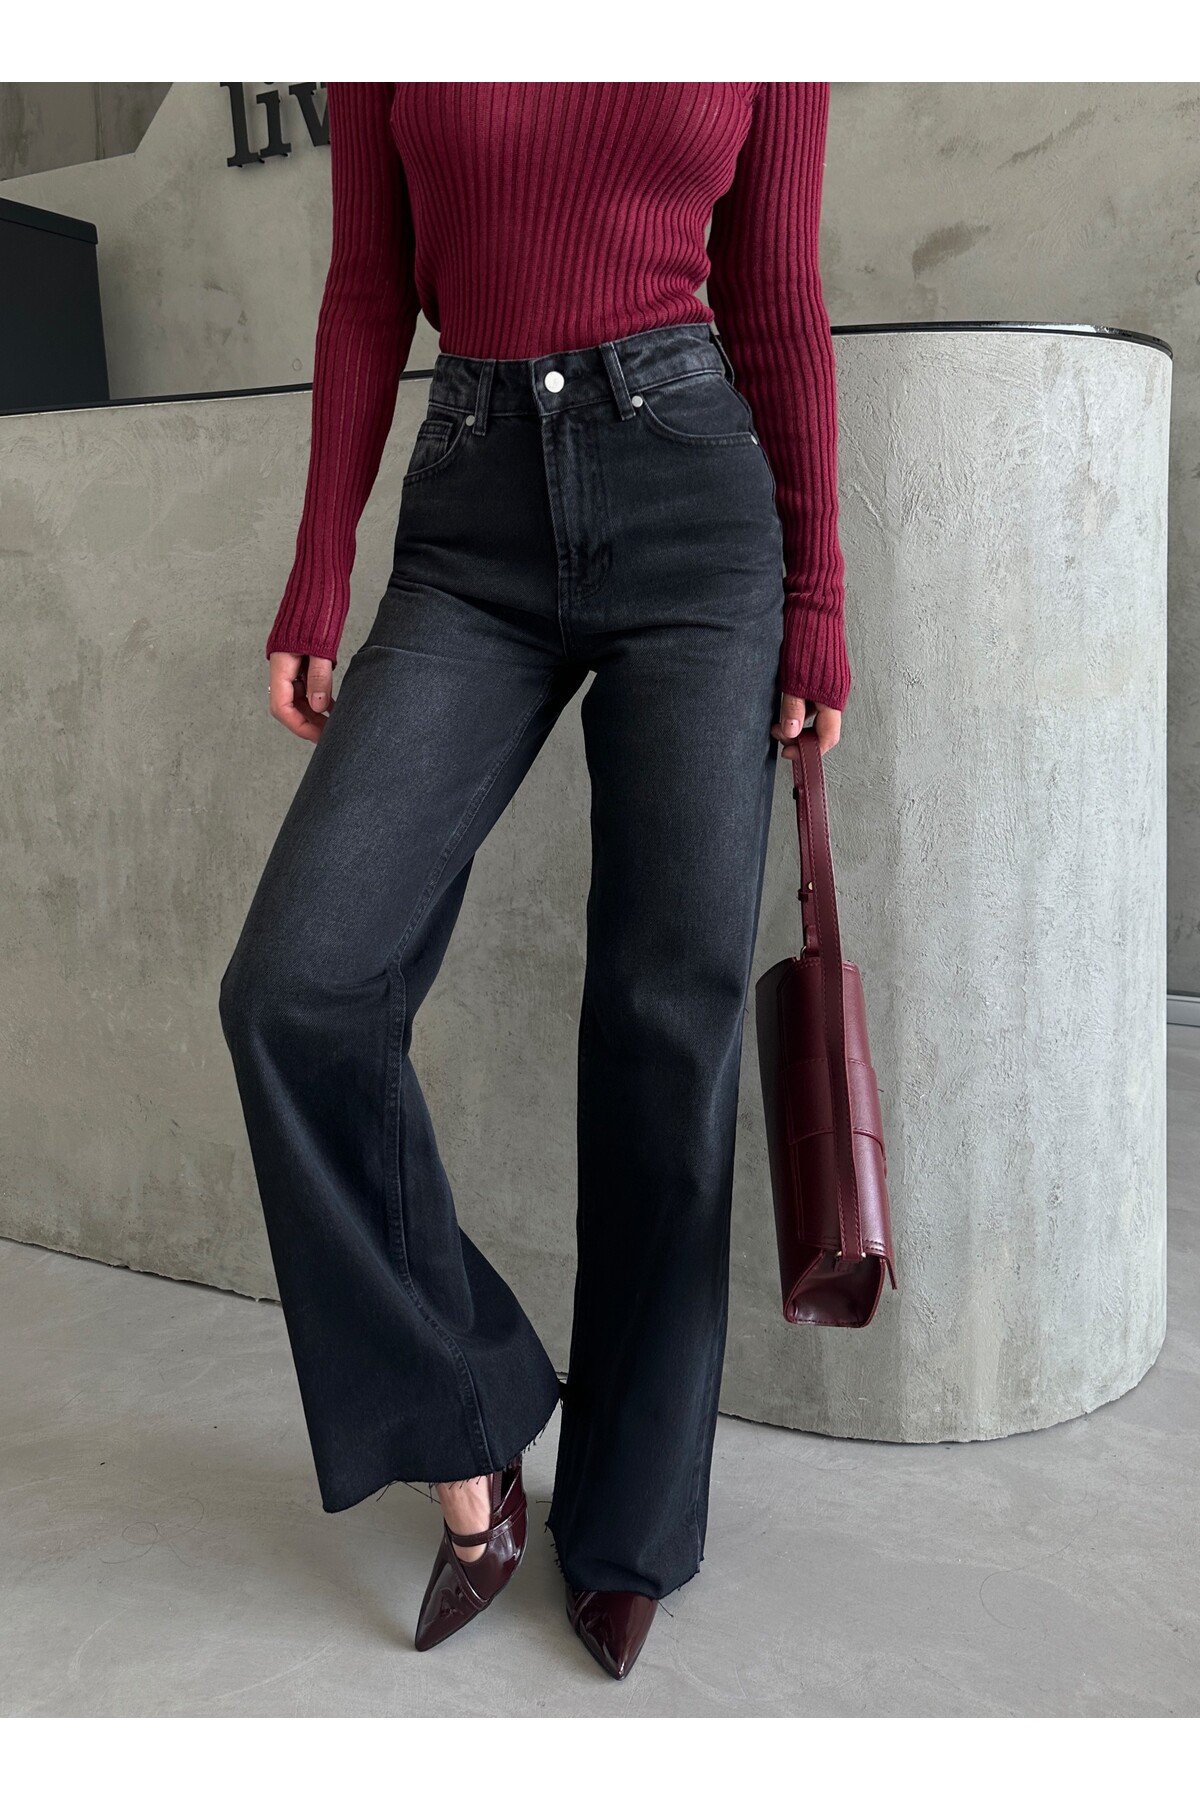 Laluvia Black Shaded Wide Leg Jeans